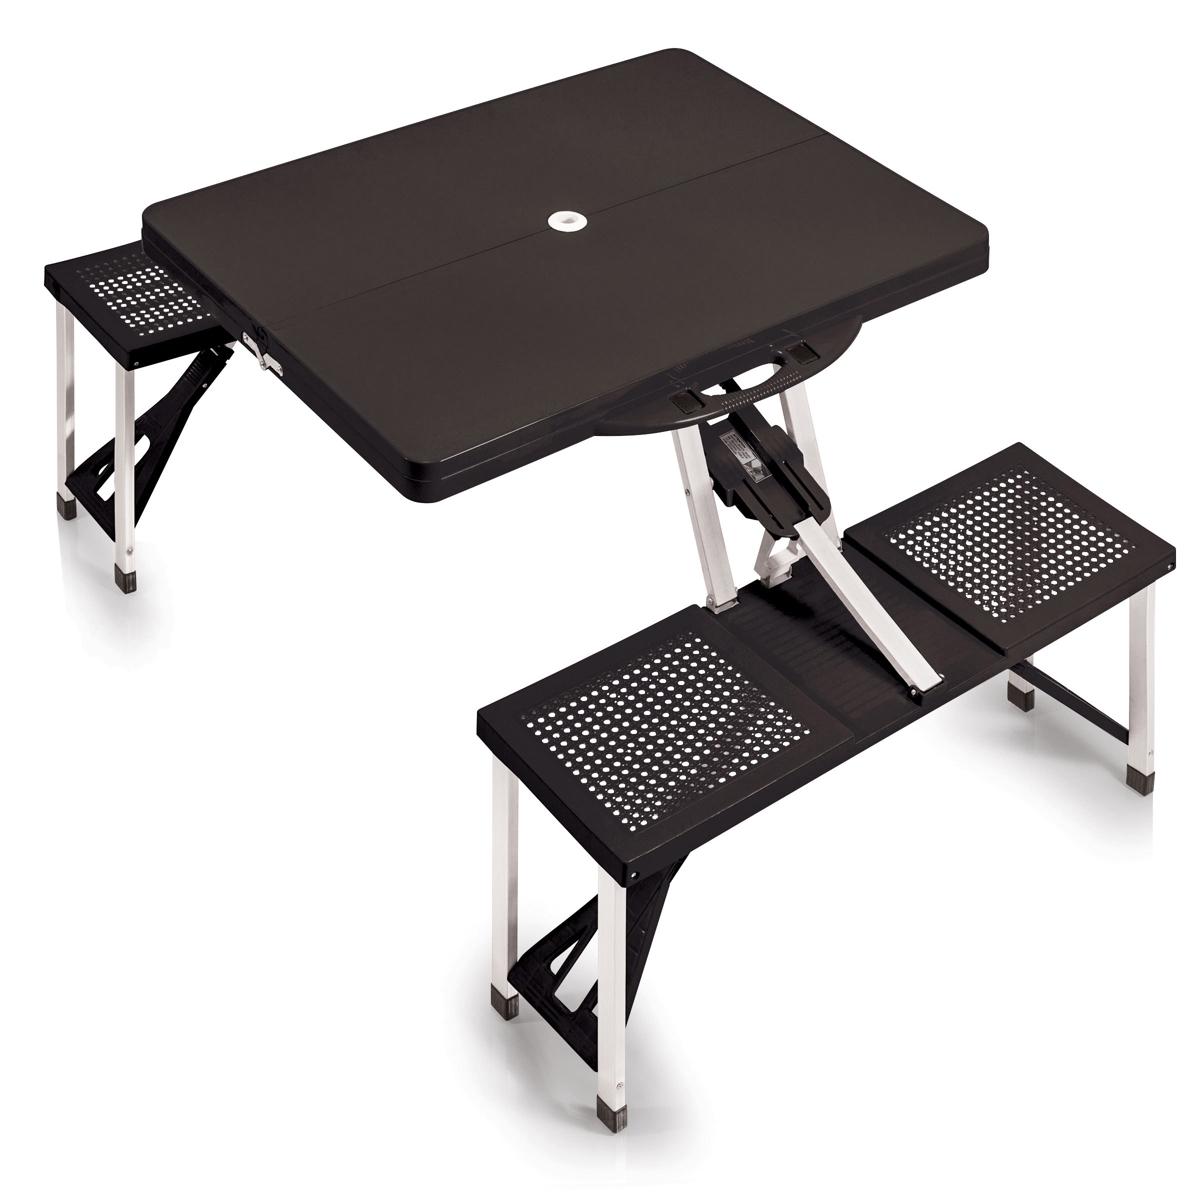 by Picnic Time Picnic Table Portable Folding Table with Seats - Black